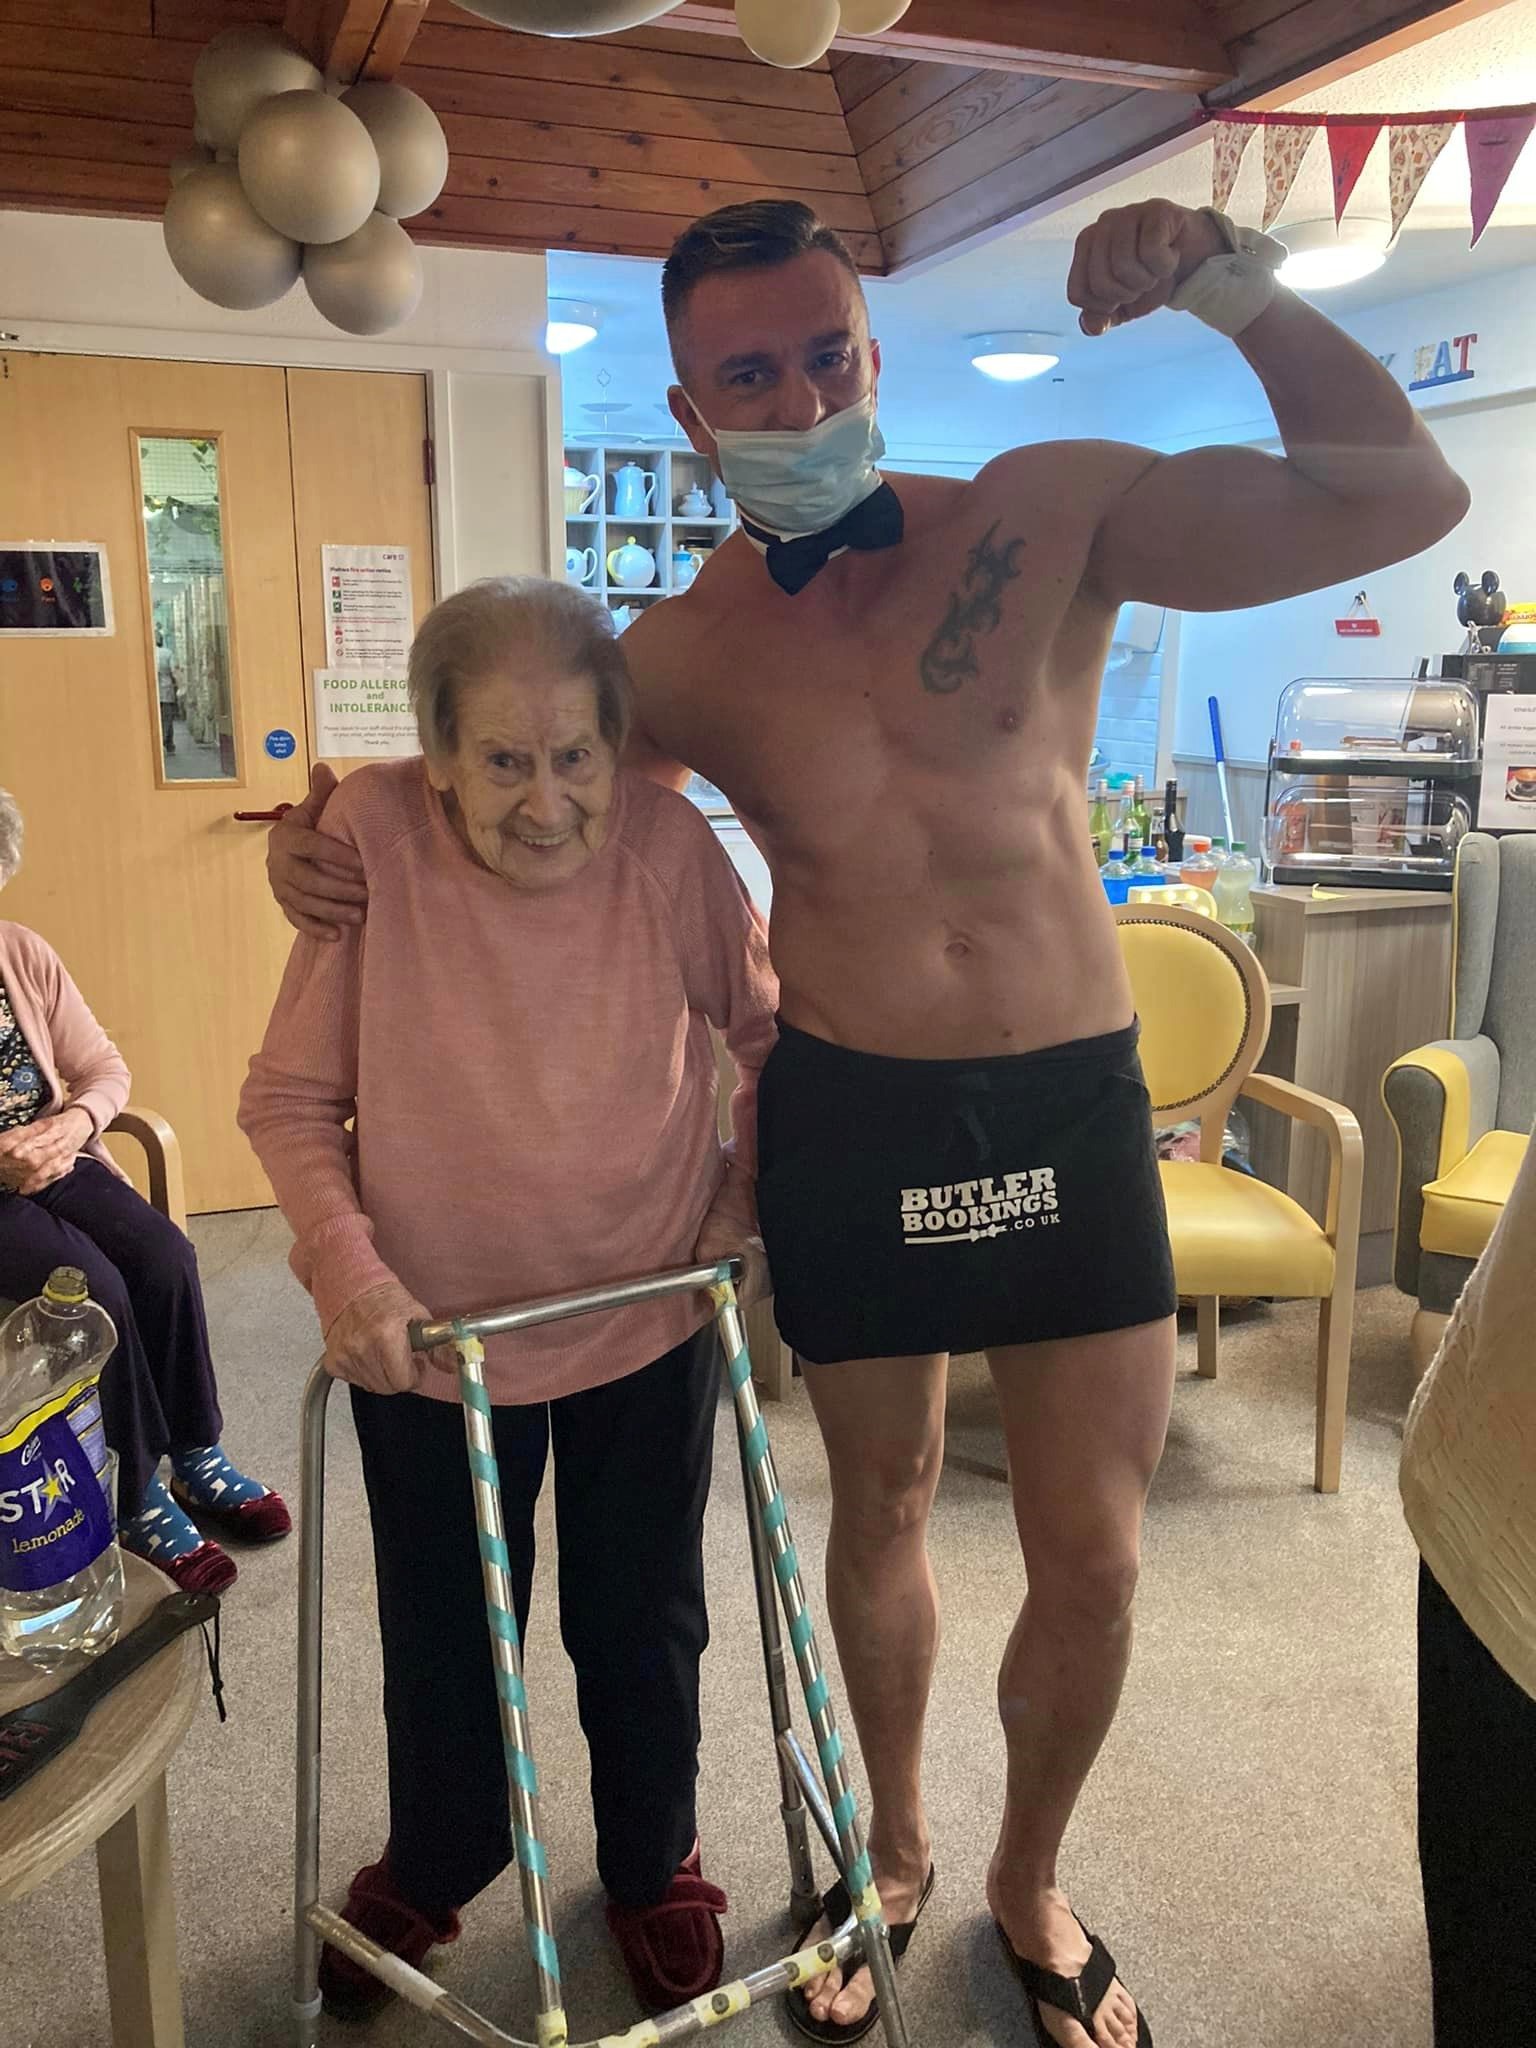 Man flexing his arm muscle and posing with a woman holding onto a zimmer frame